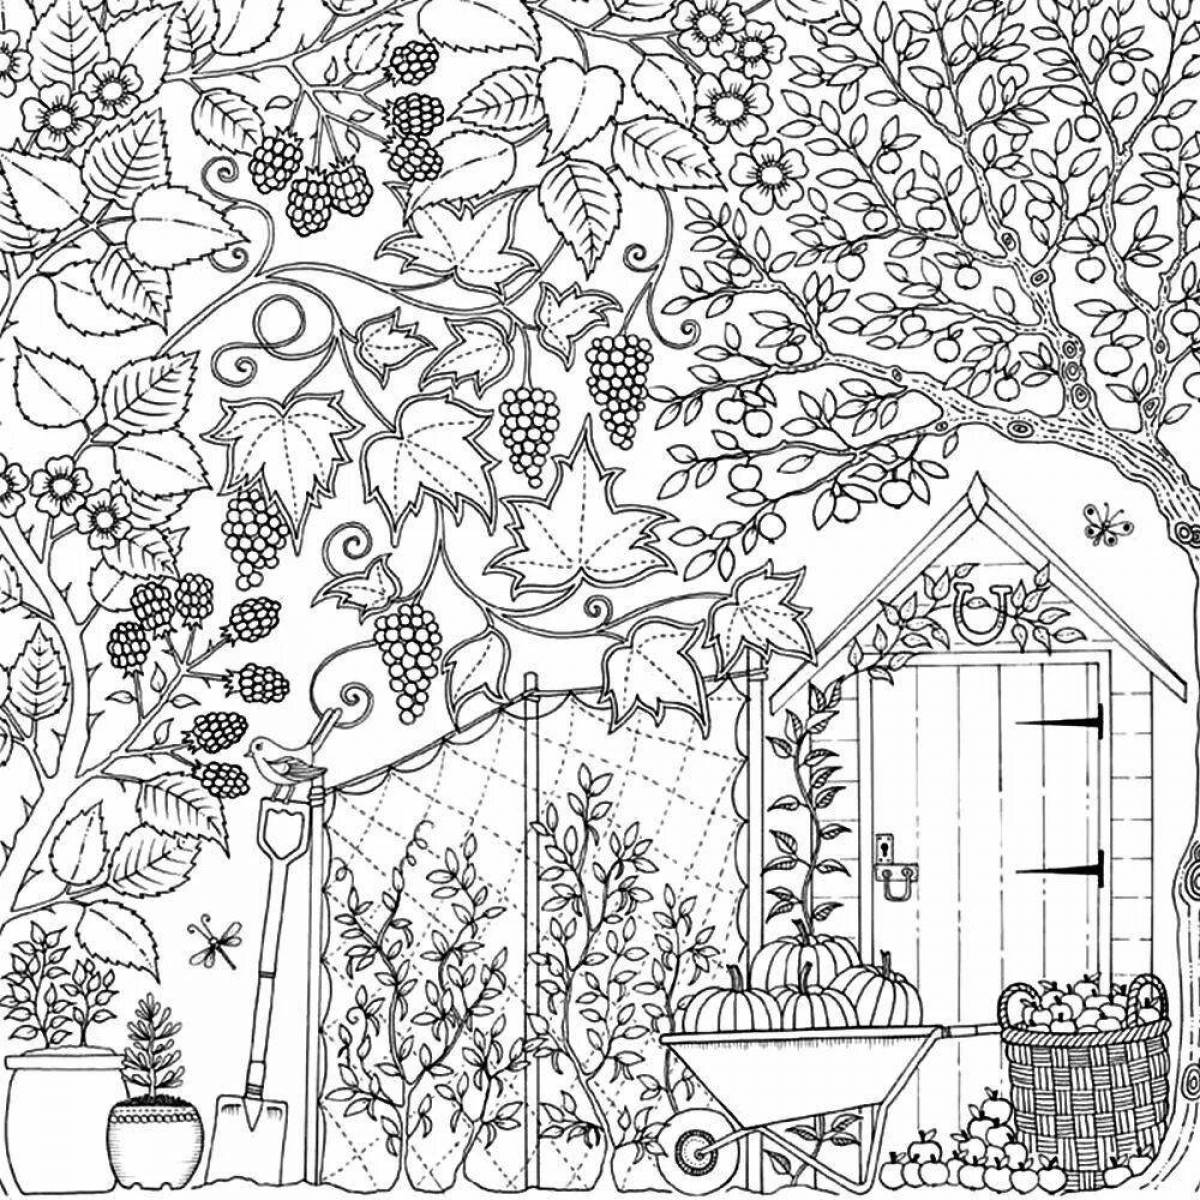 Coloring page lush garden